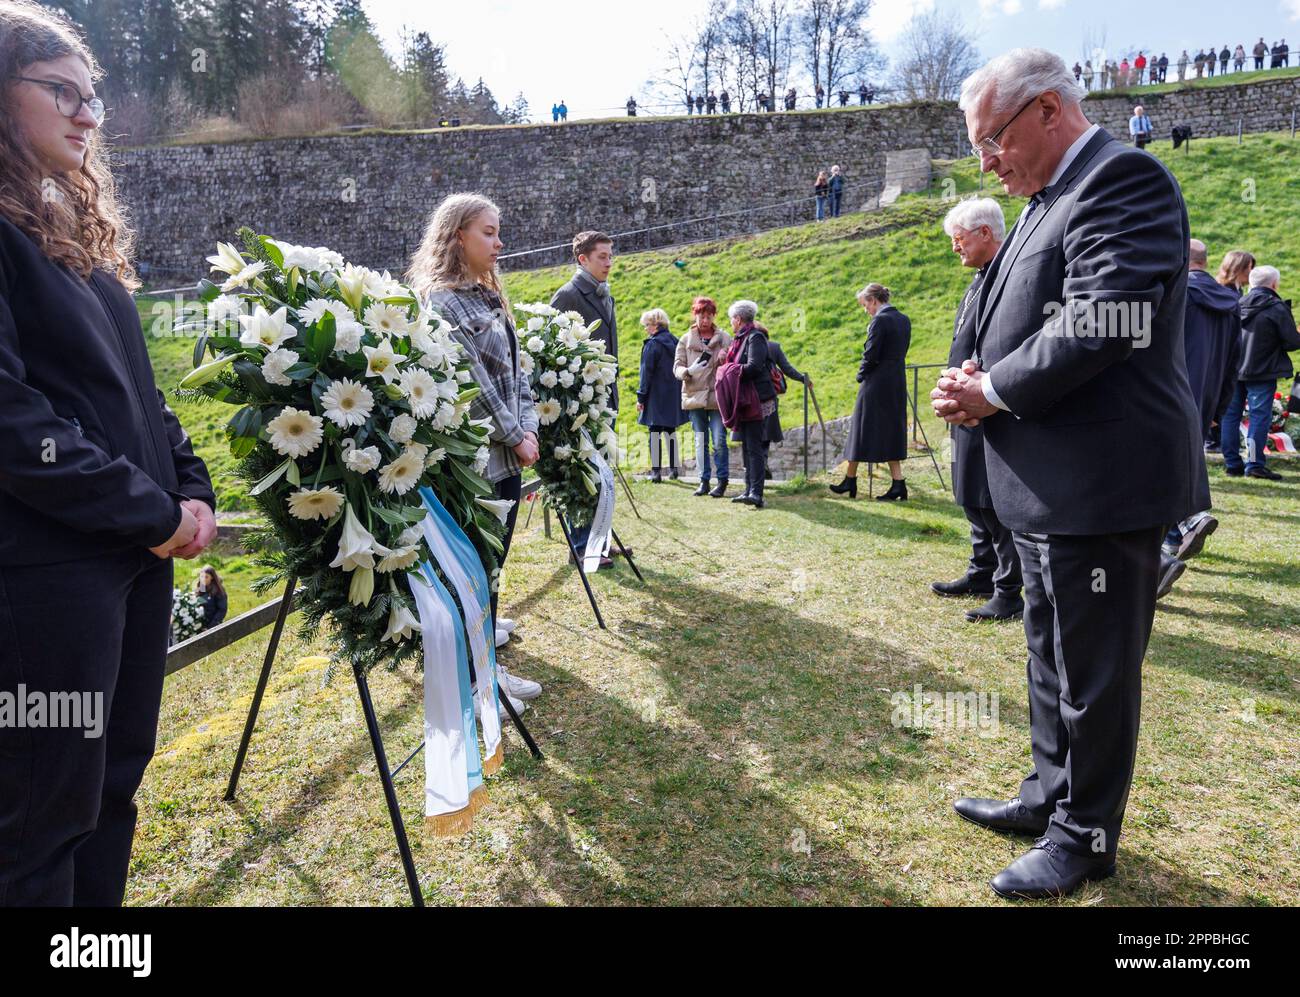 23 April 2023, Bavaria, Flossenbürg: Joachim Herrmann (r, CSU), Minister of the Interior of Bavaria, stands at a wreath in the so-called 'Valley of Death' in memory of the victims of the concentration camp during the commemoration of the 78th anniversary of its liberation. Next to him is Heinrich Bedford-Strohm, regional bishop of the Evangelical Lutheran Church in Bavaria. Flossenbürg concentration camp had been liberated by the U.S. Army on April 23, 1945. Of about 100,000 people imprisoned there or in the subcamps, around 30,000 had died. Photo: Daniel Karmann/dpa Stock Photo